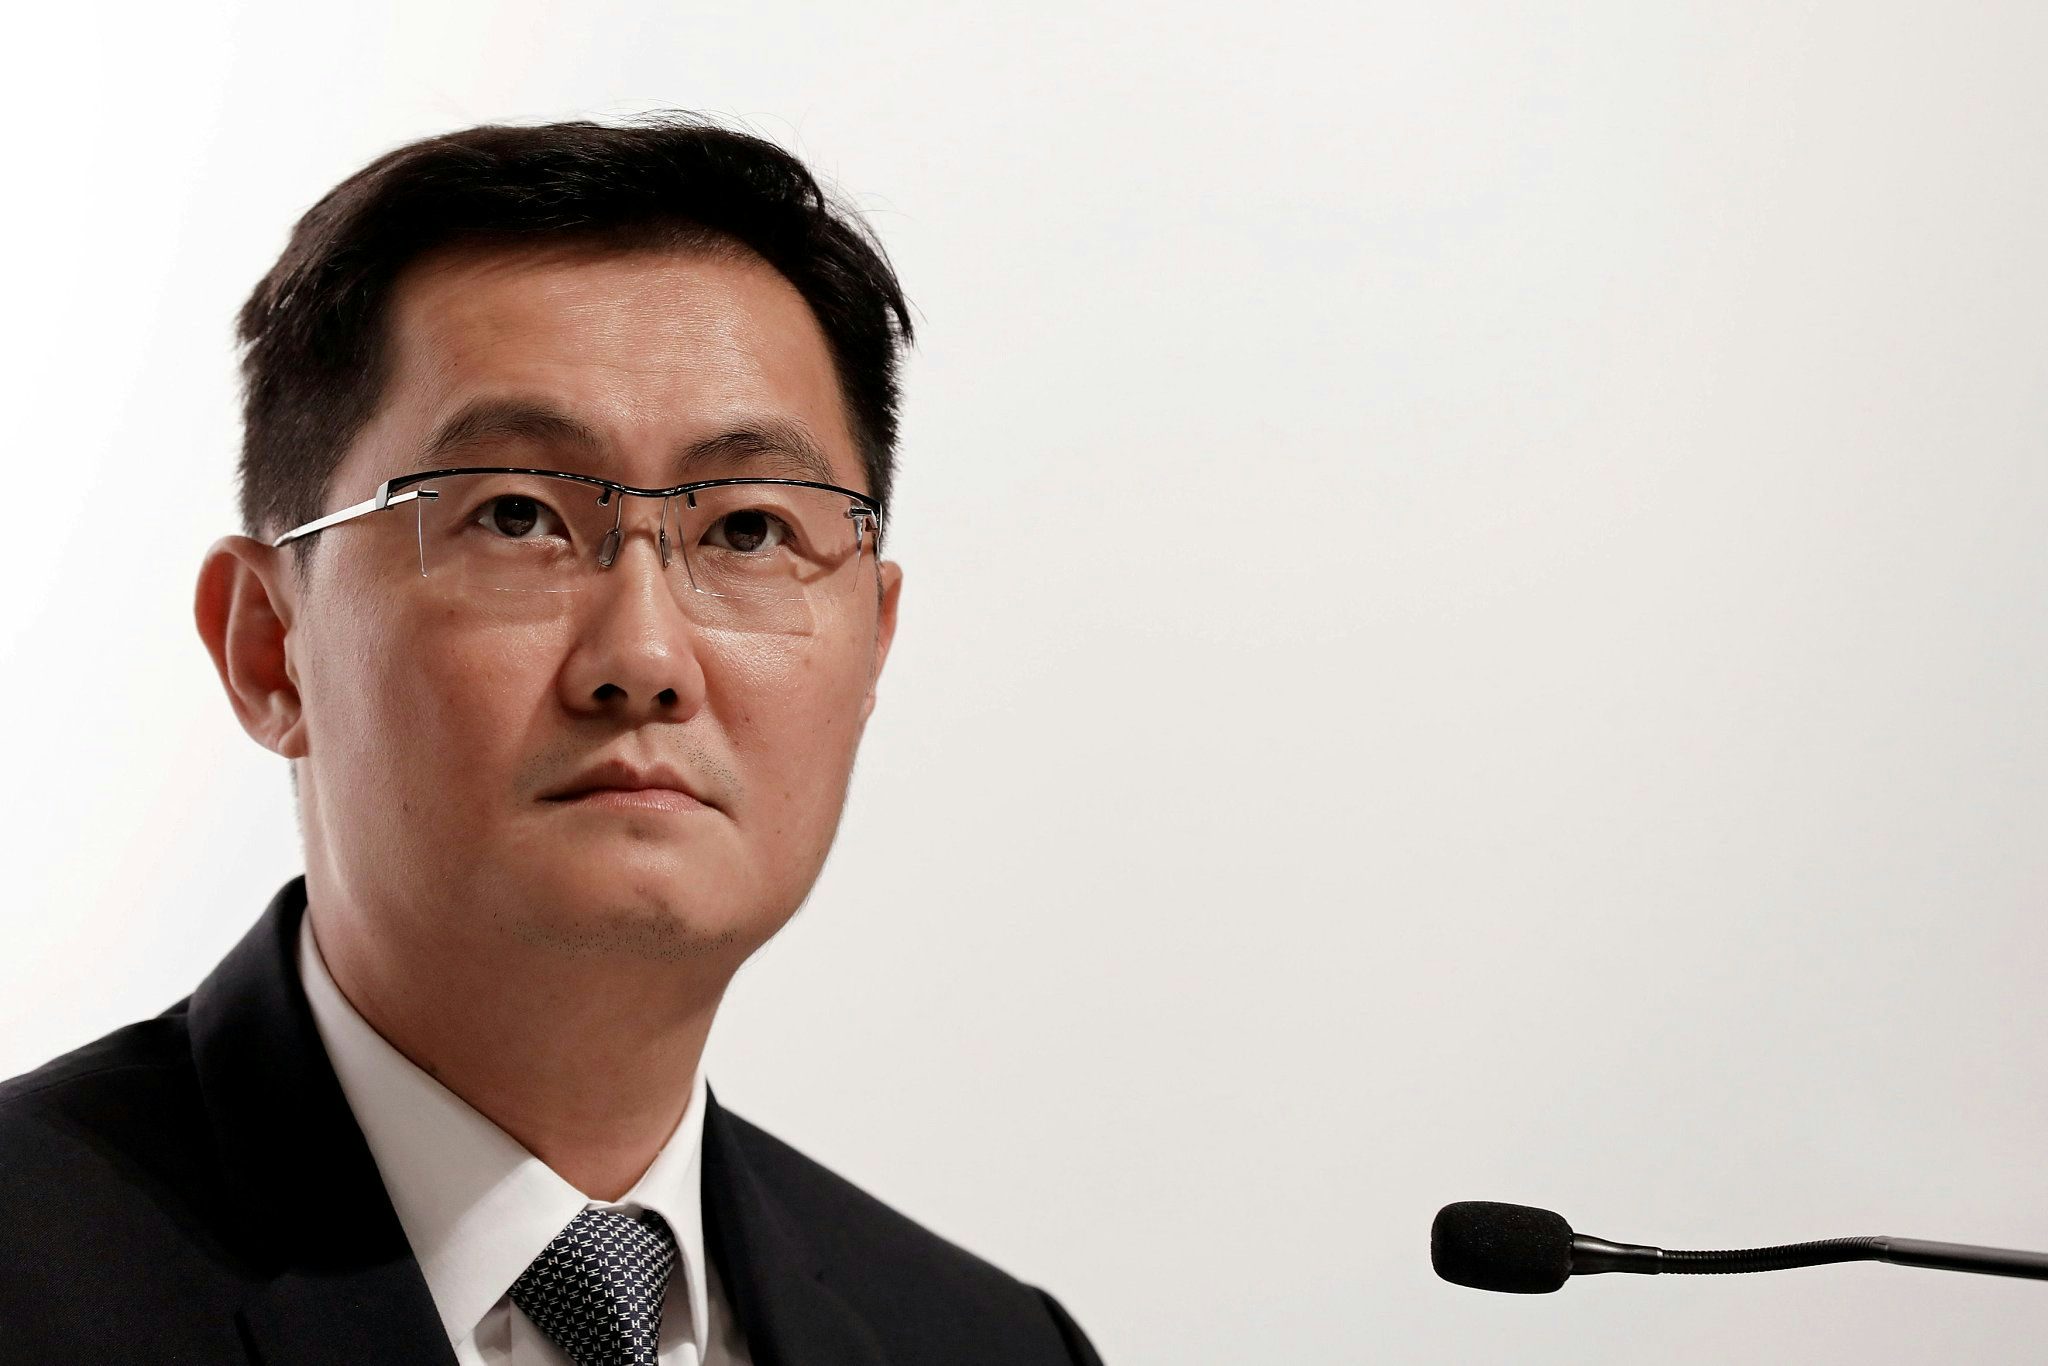 Tencent CEO Pony Ma Dethrones Jack Ma as China's Richest Man